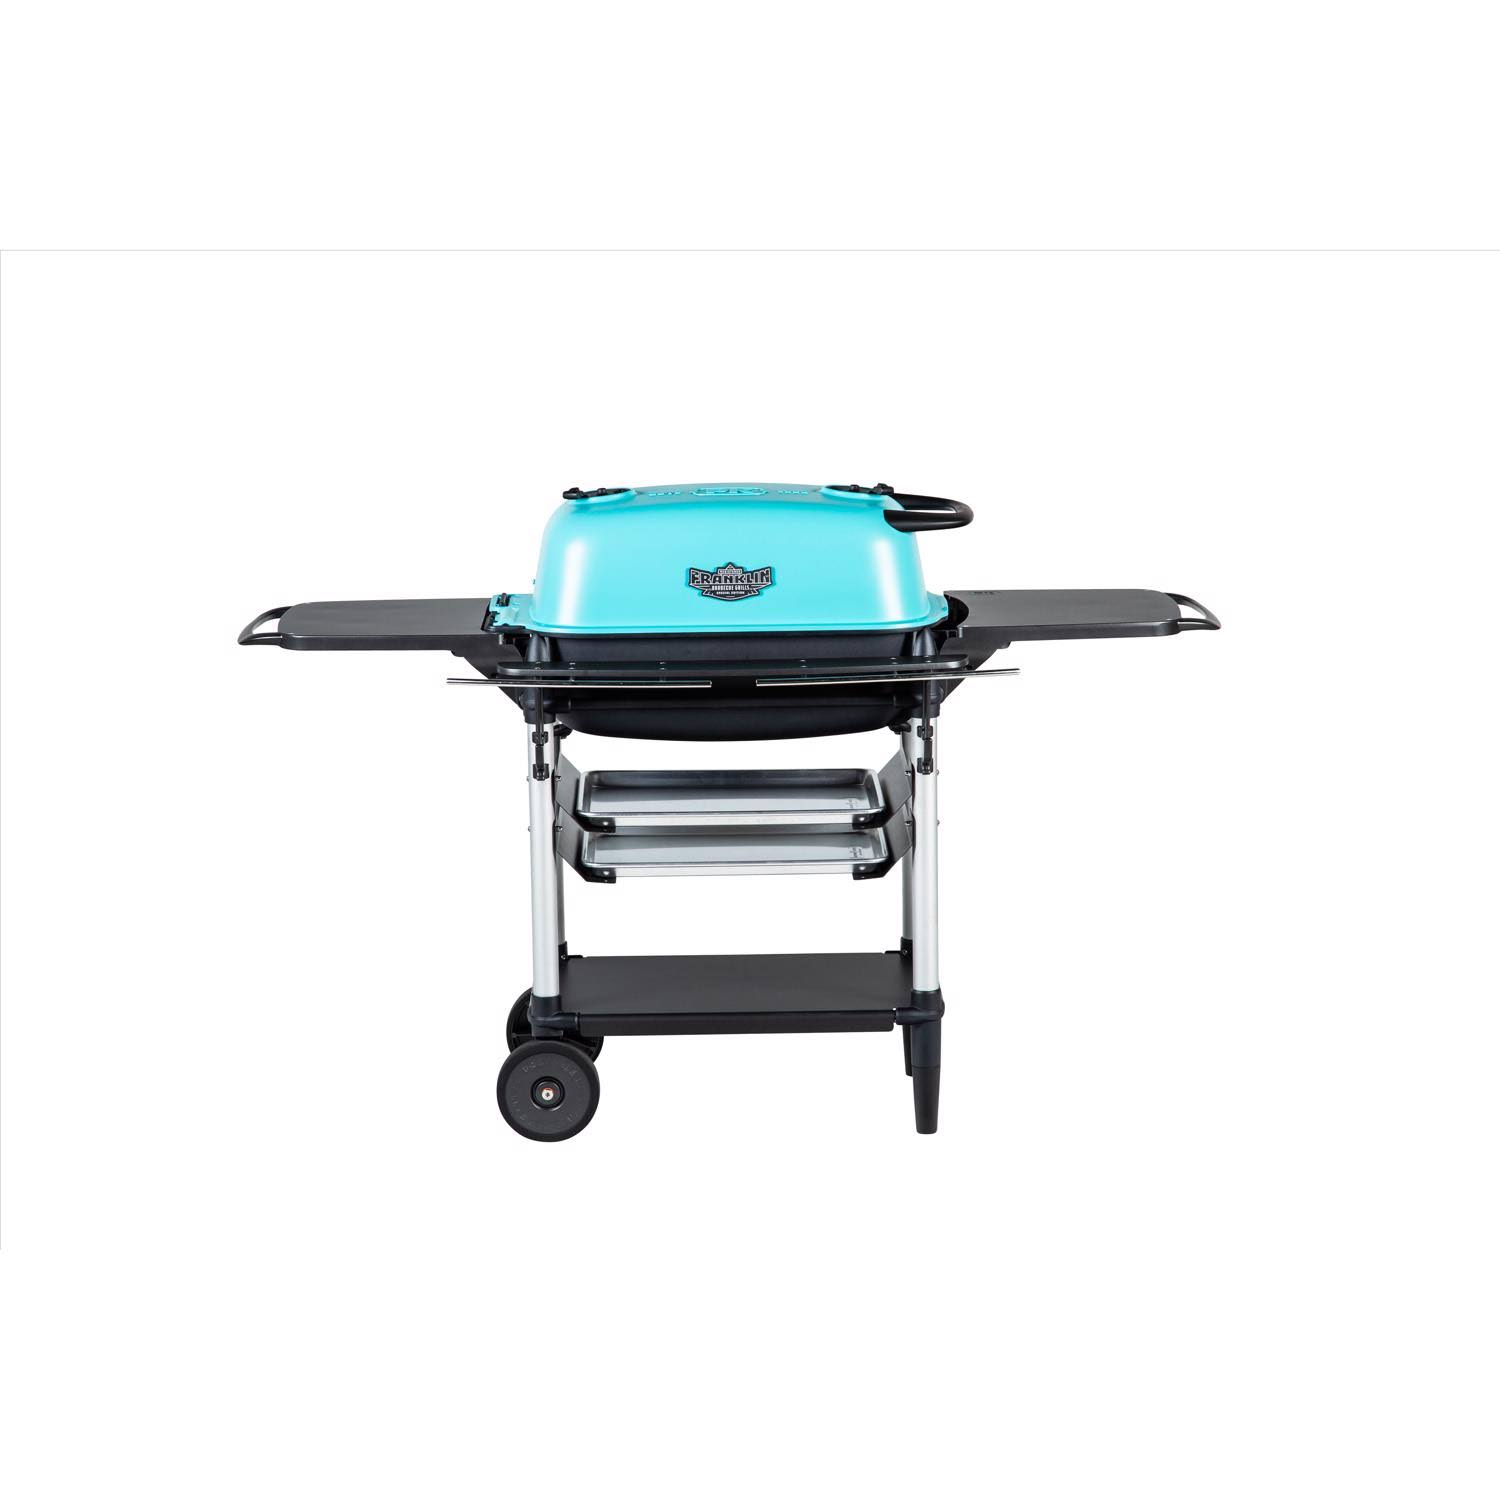 The PK300 Aaron Franklin Edition Grill & Smoker ( Teal & Coal )